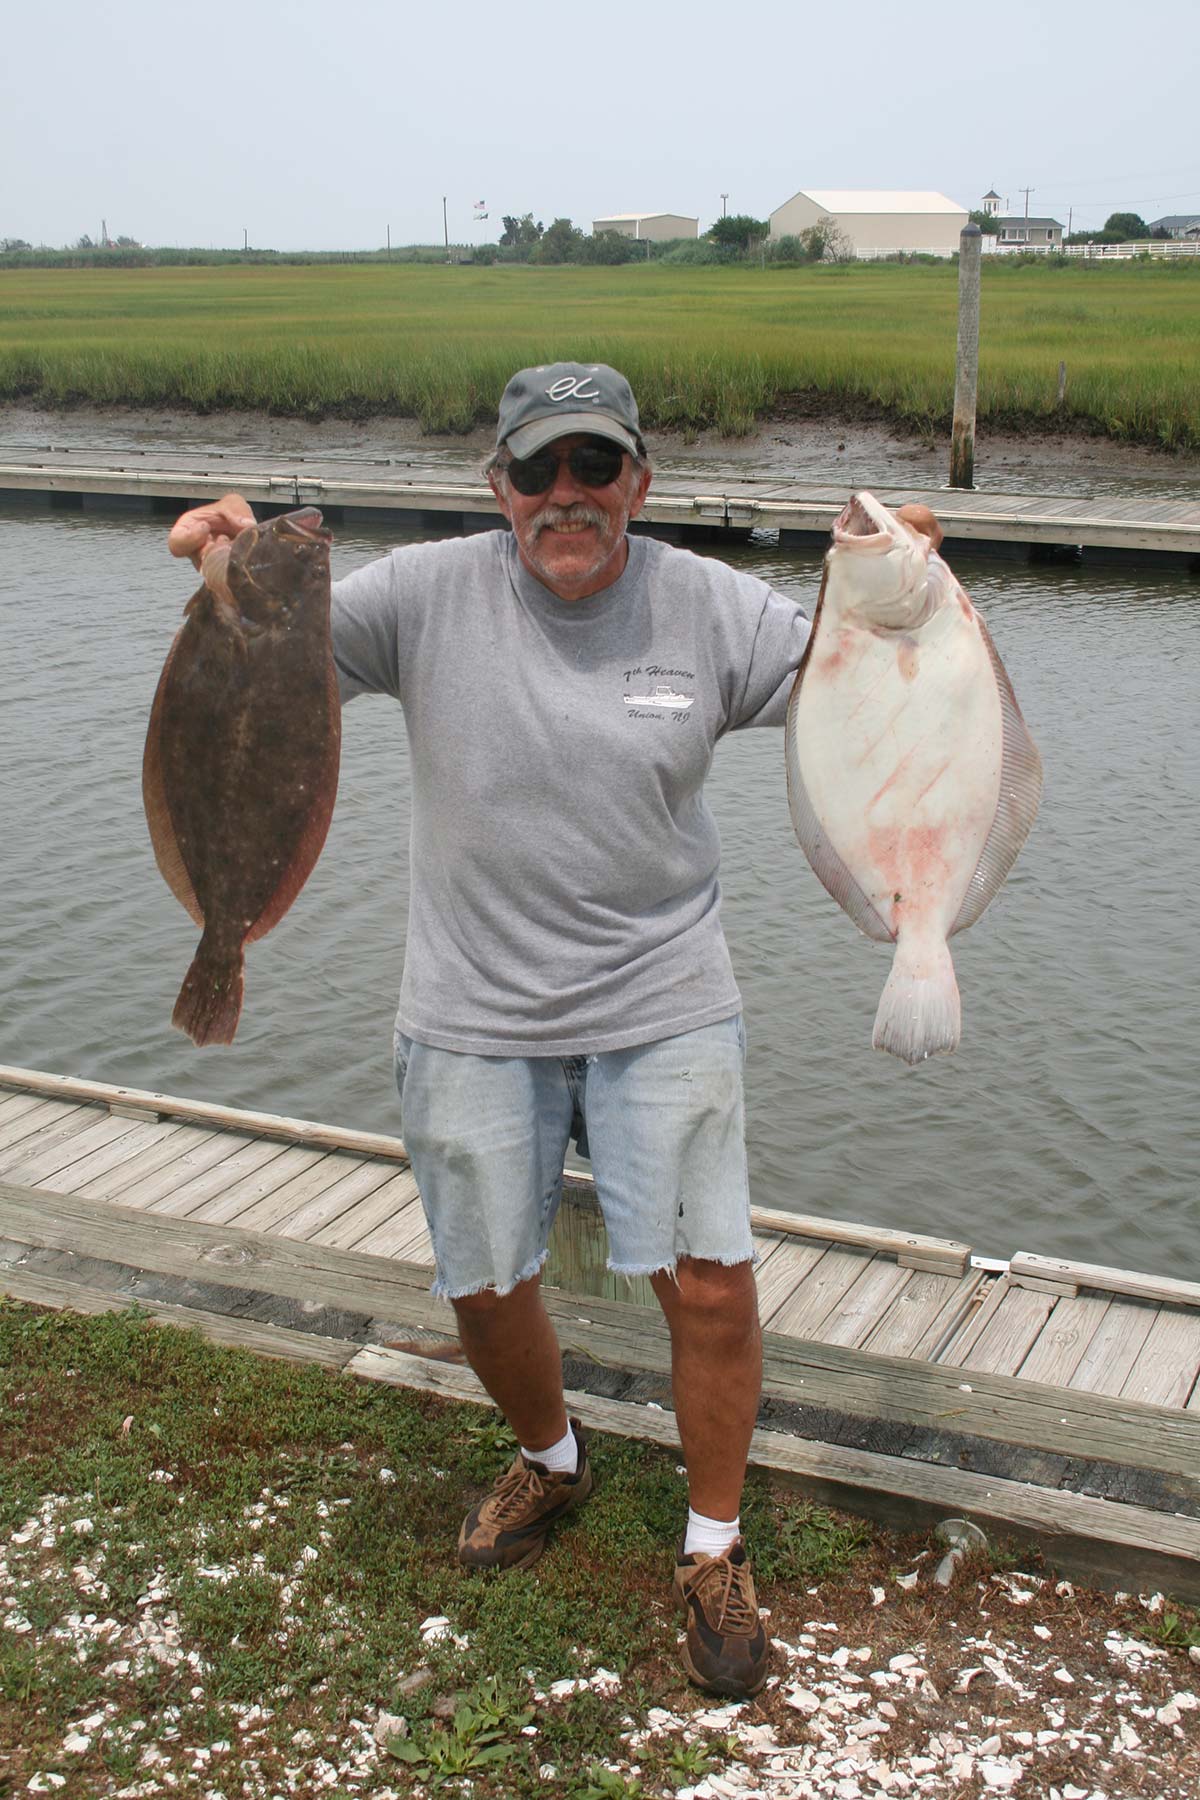 First State's First: Delaware's Summer Flounder Fishing - The